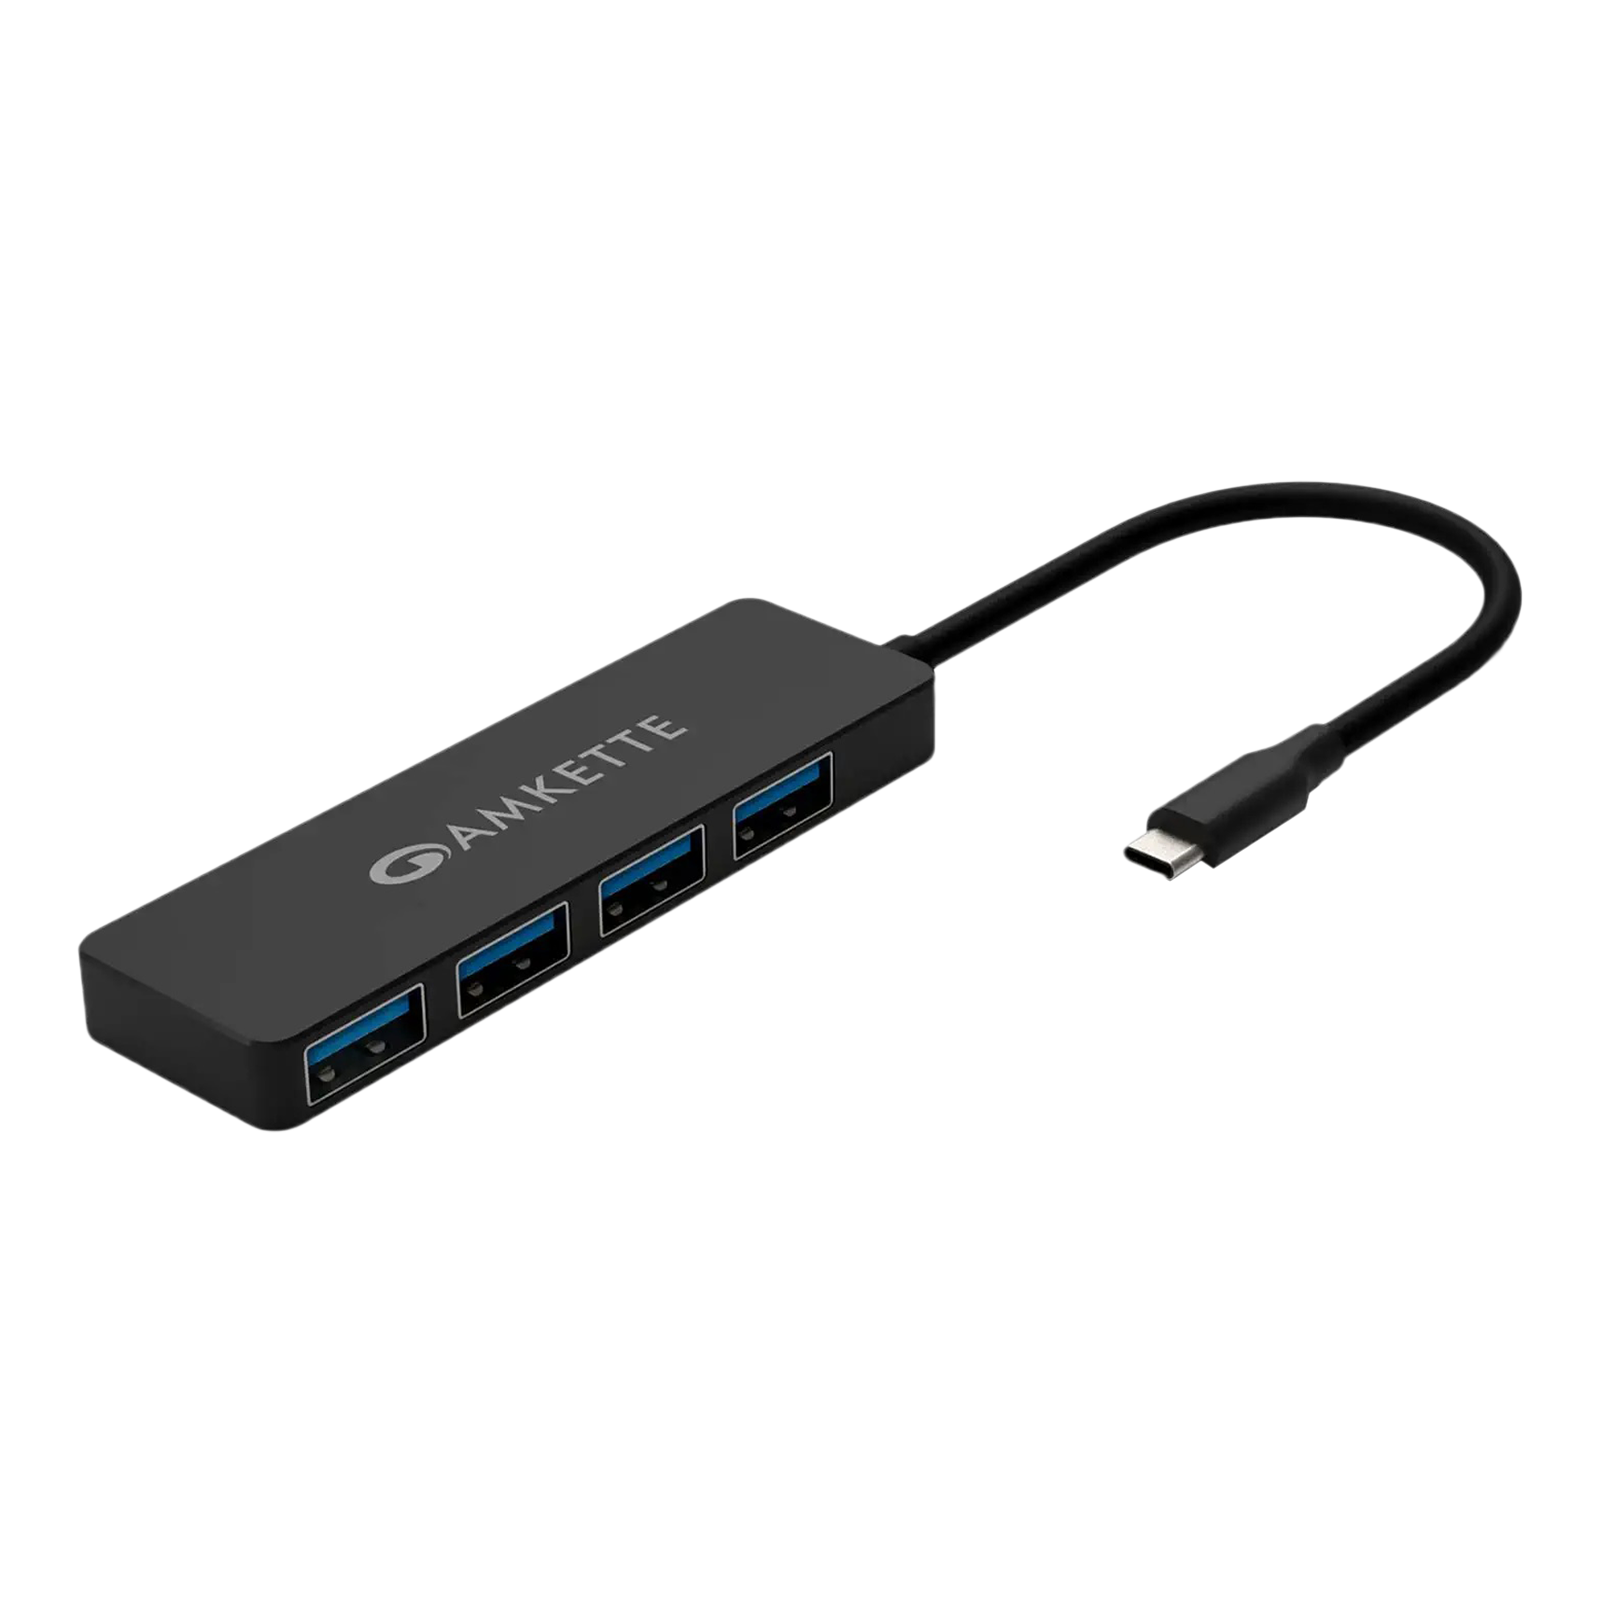 Amkette 4-in-1 USB 3.1 Type C to USB 3.0 Type A USB Hub (Up to 5 Gbps Data Transfer, Black)_1